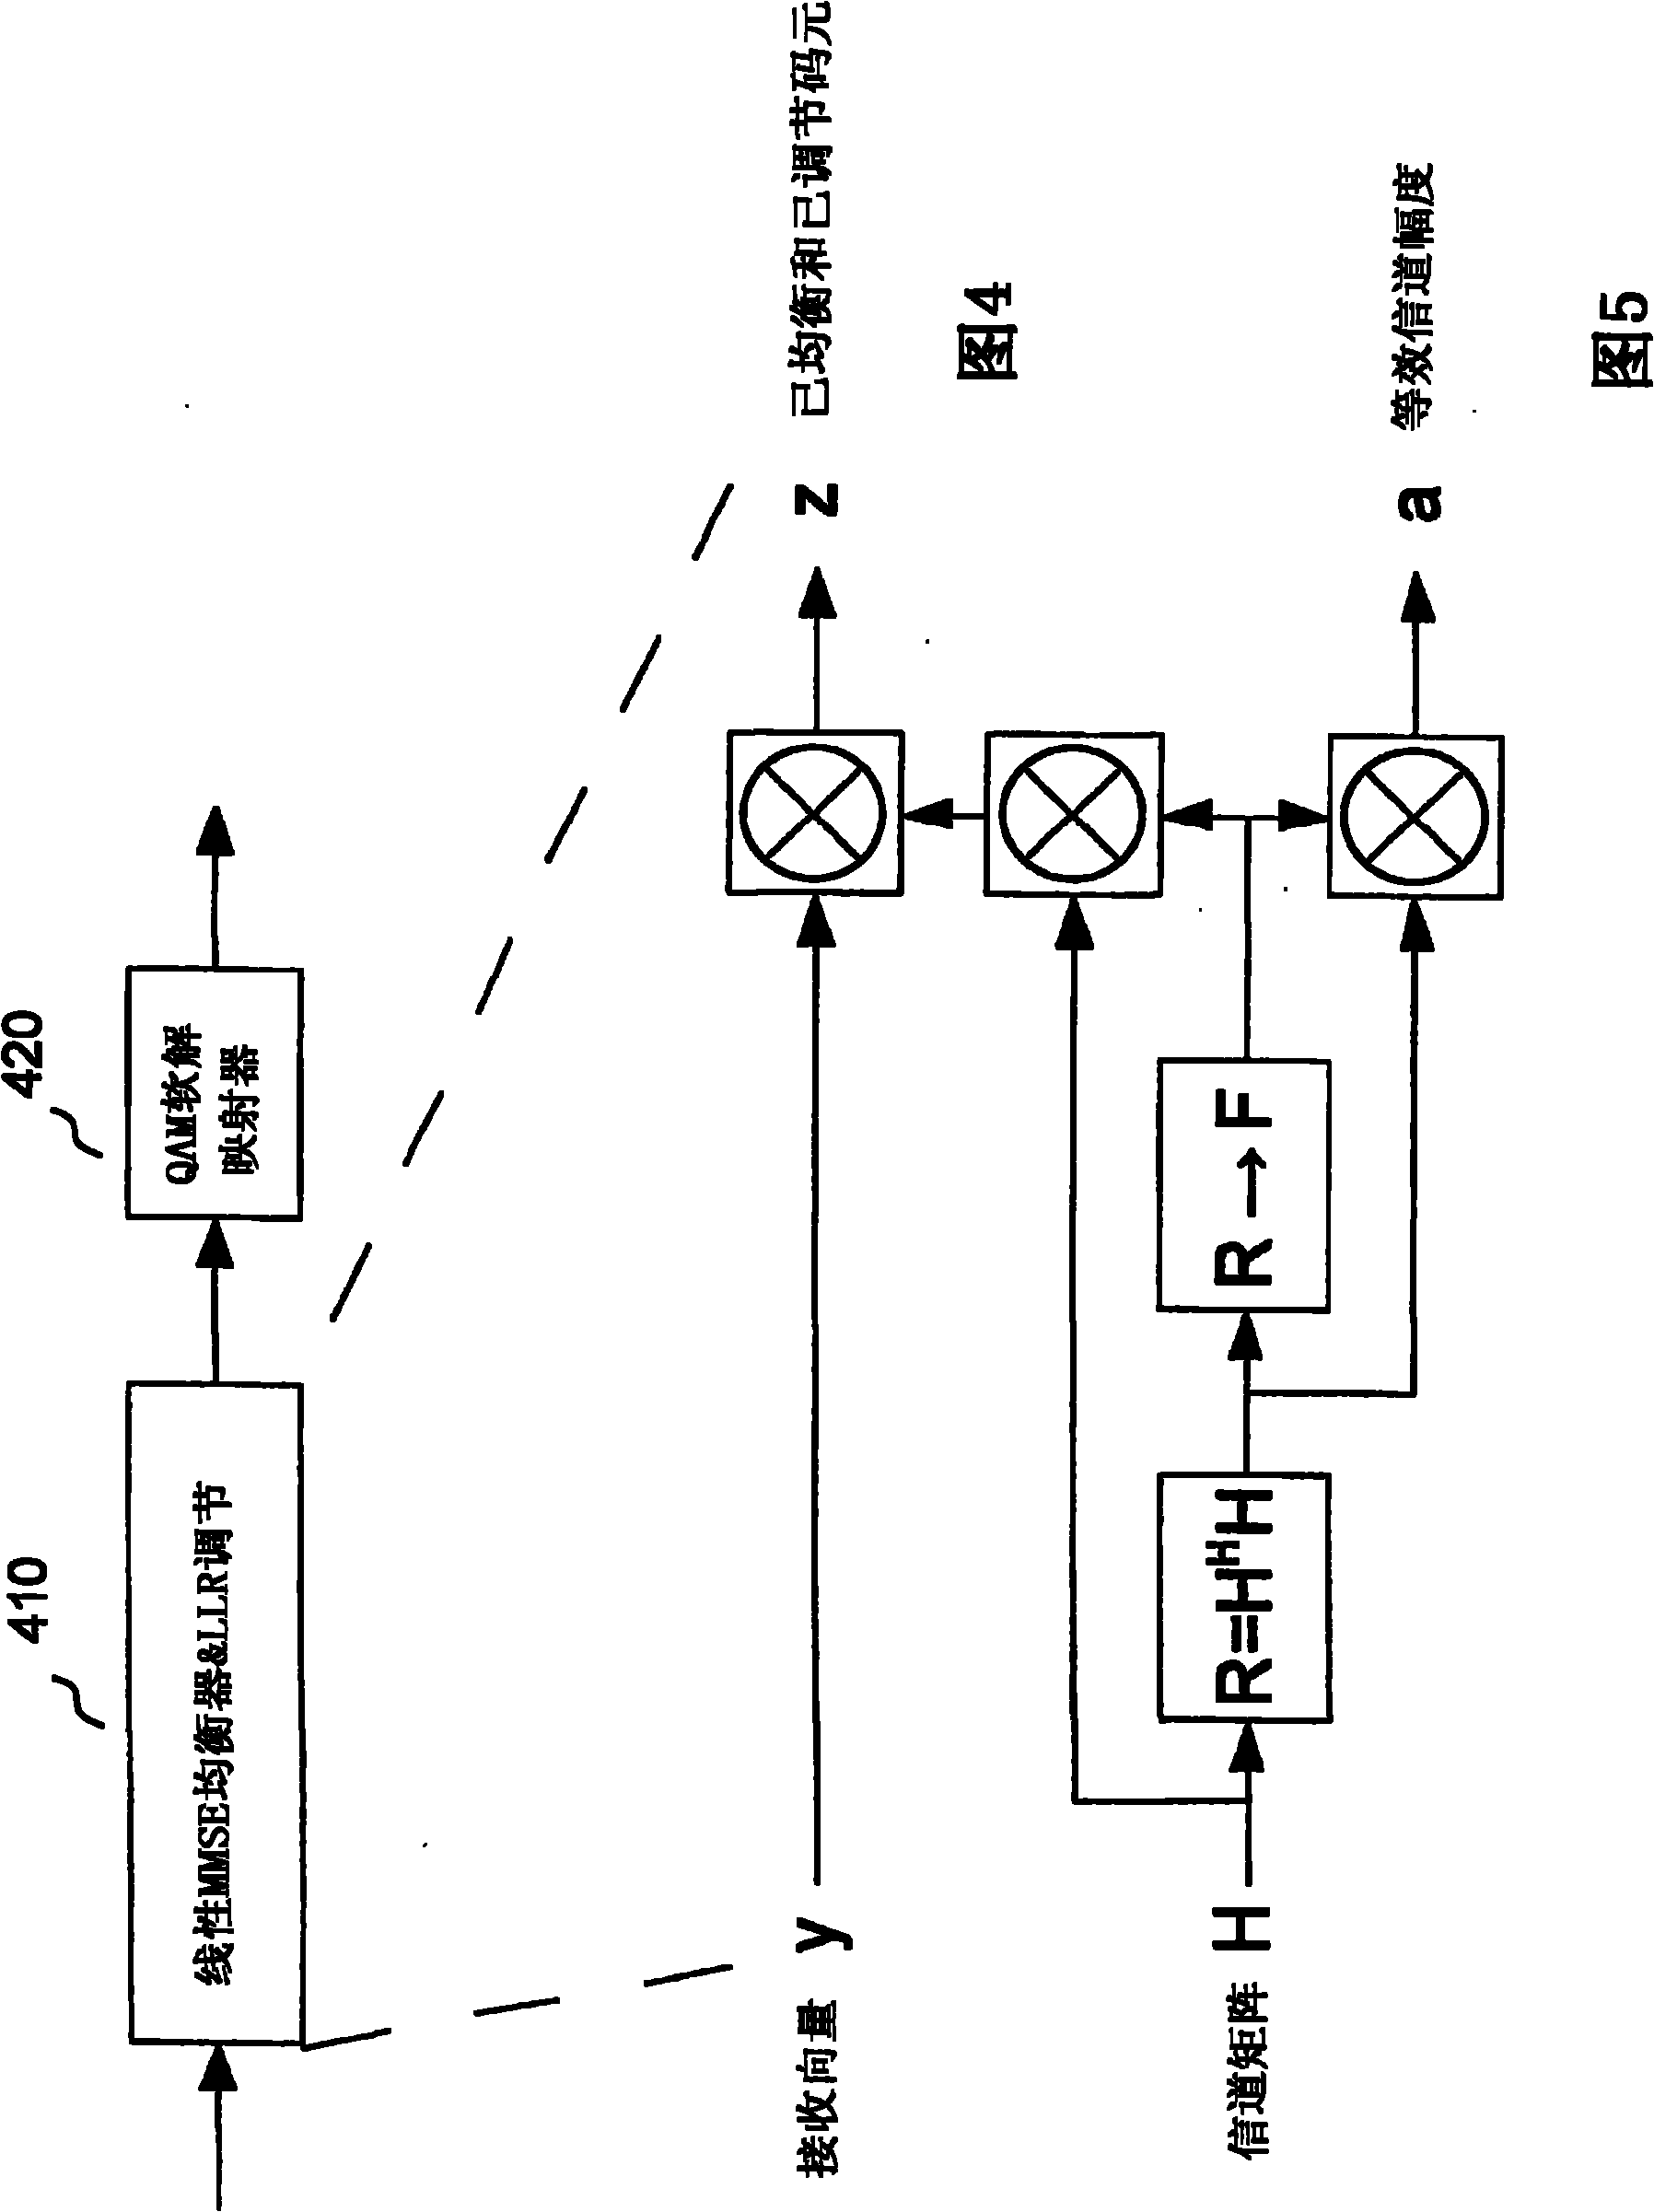 Method and apparatus for interference mitigation in a baseband OFDM receiver